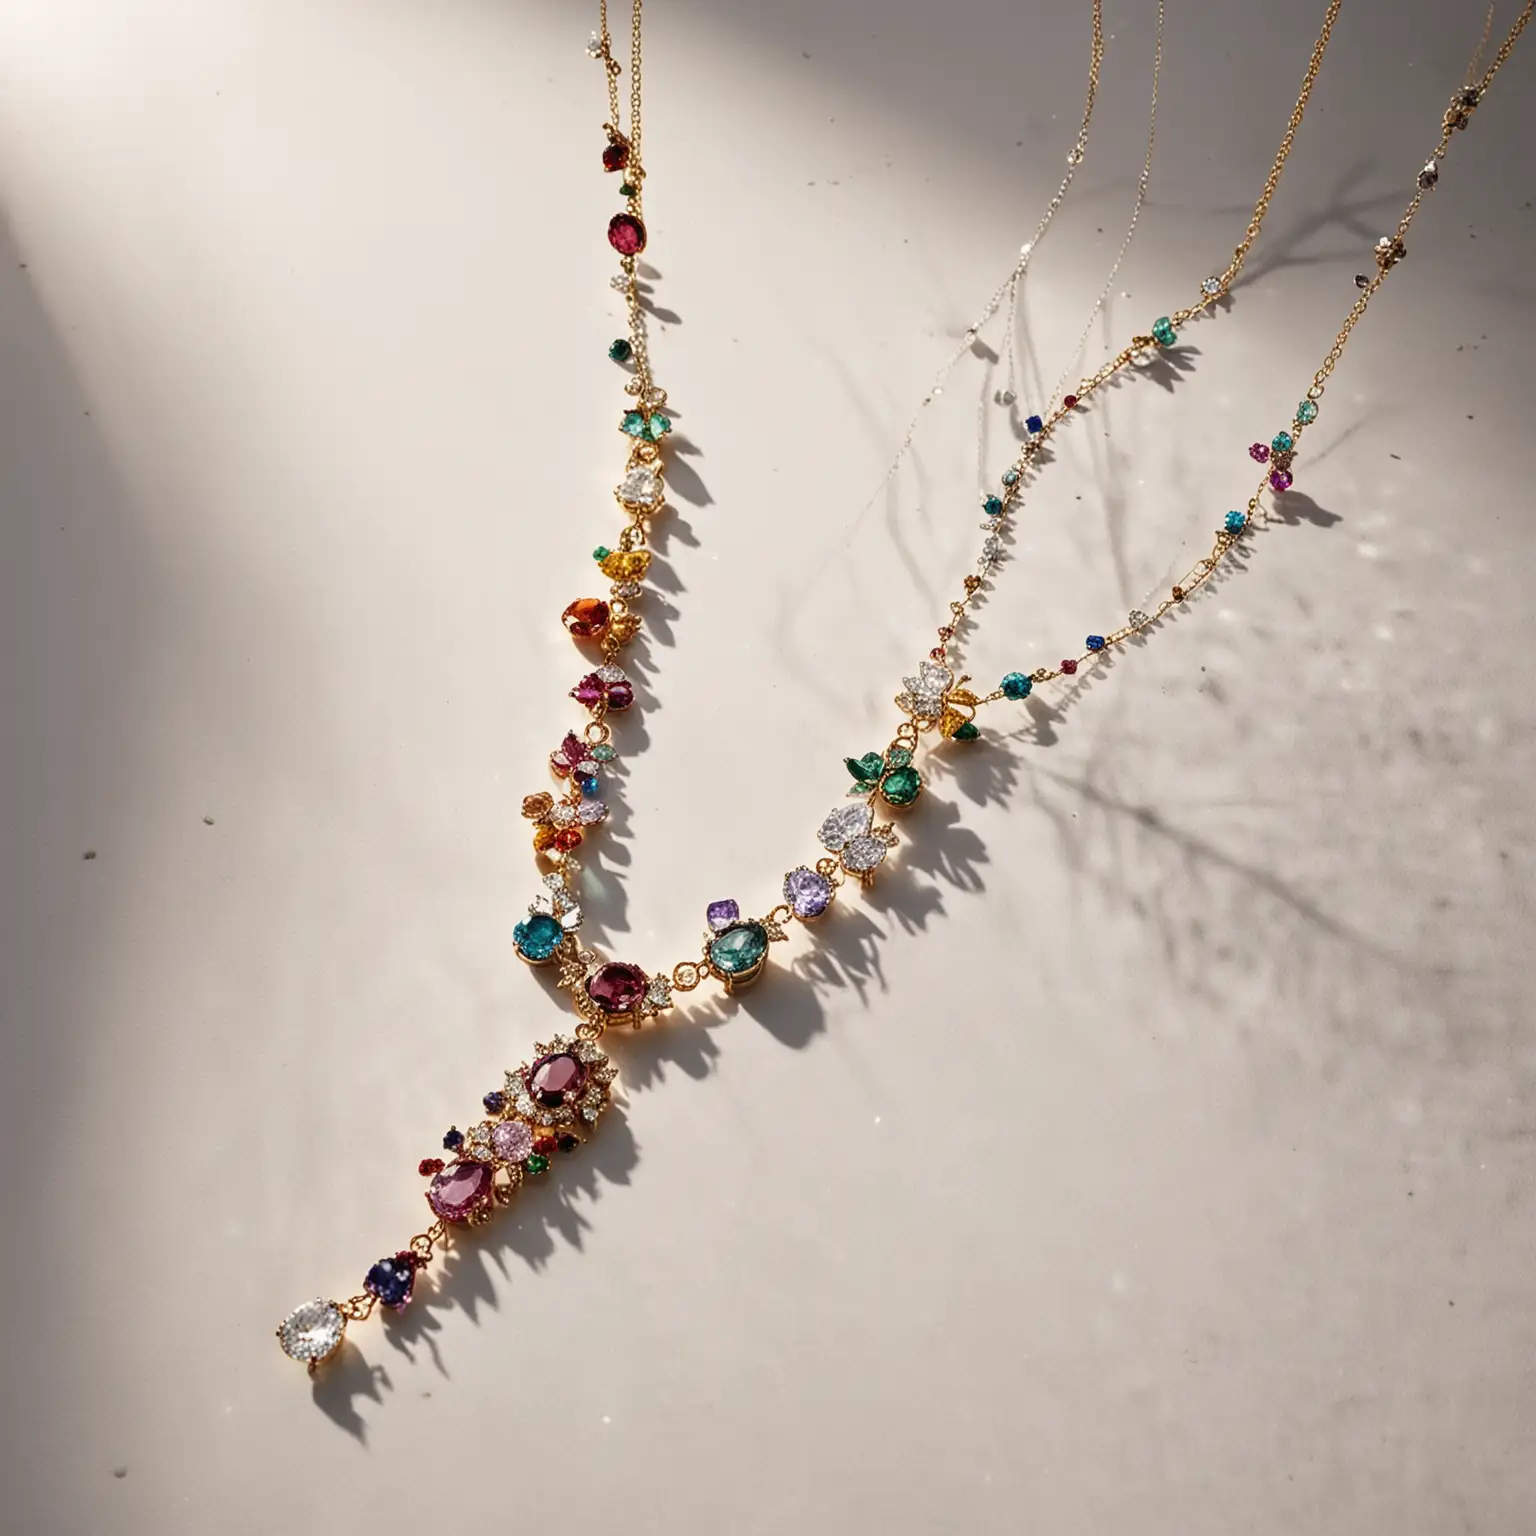 A post of  jewelry neclaces advertising with white wall backrground and sunlight shadows, and crystals sparkling falling around with heaven vibe and some fresh colors of jewels